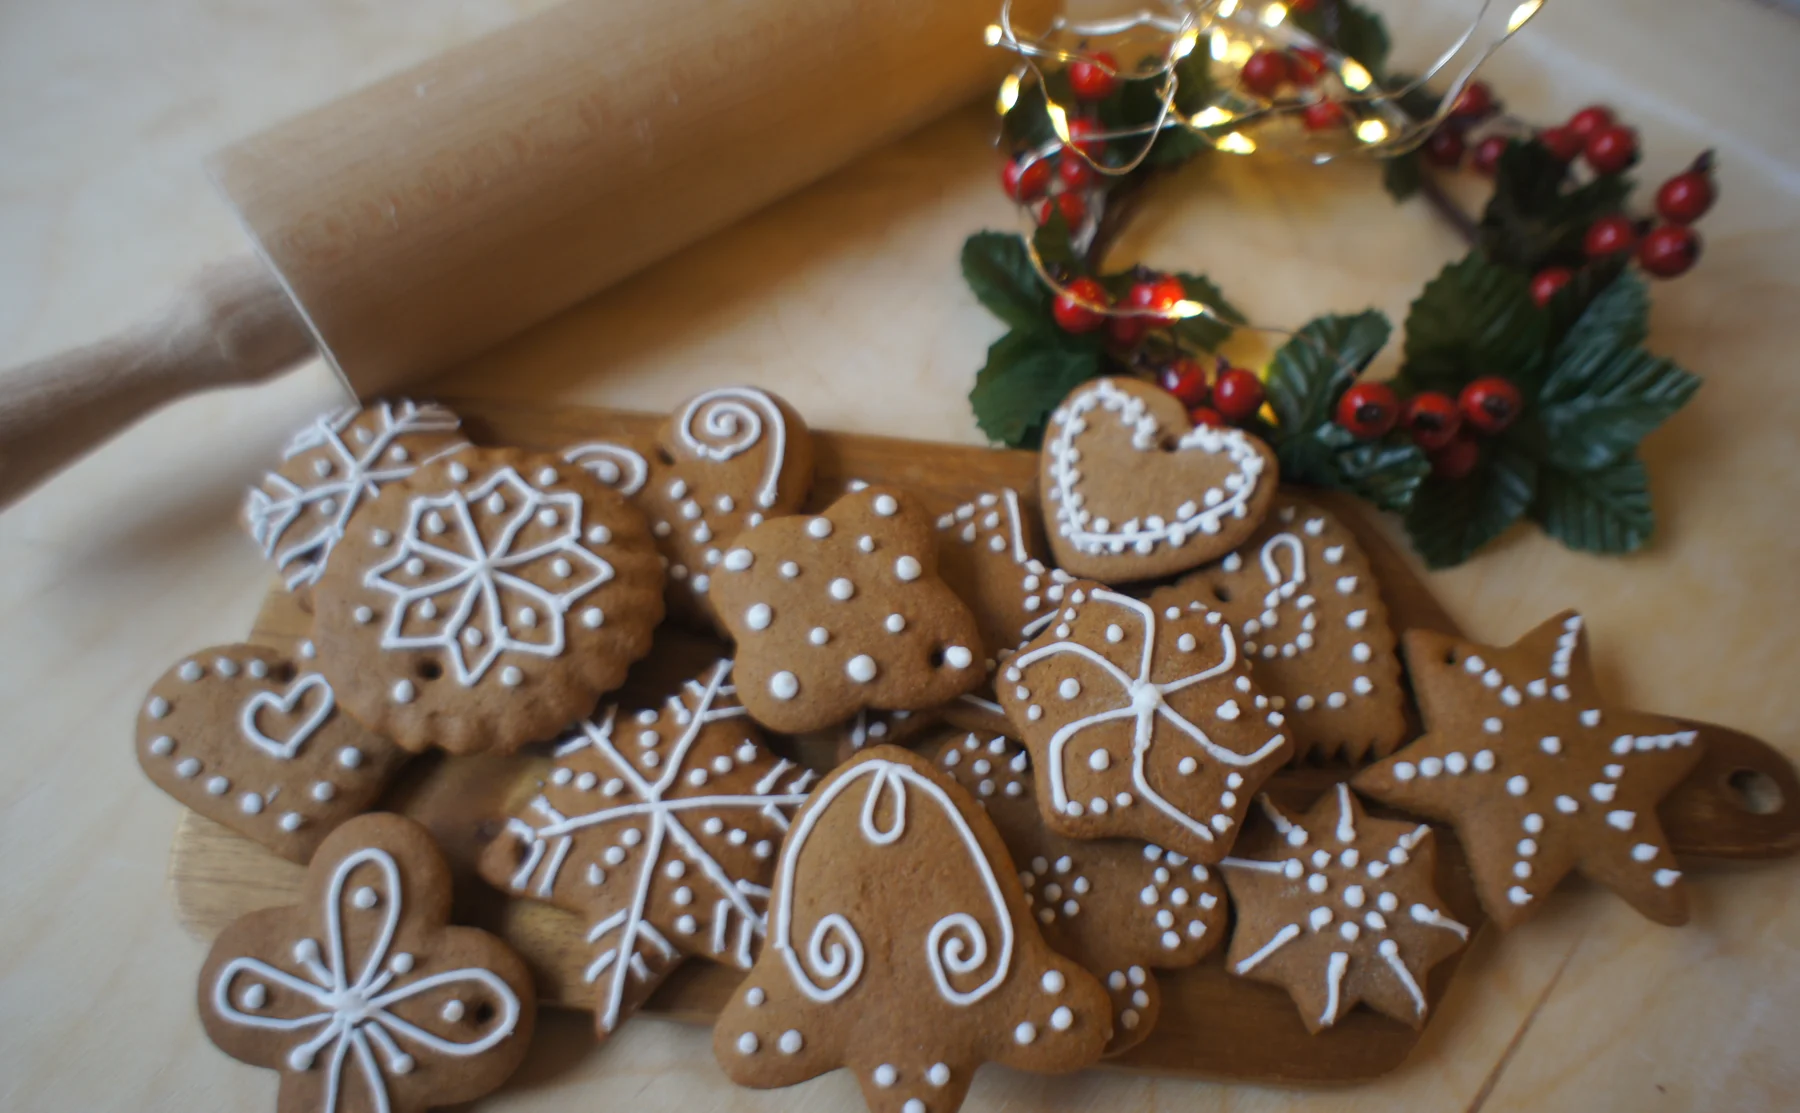 Gingerbread Baking and Decorating Class - 1465148